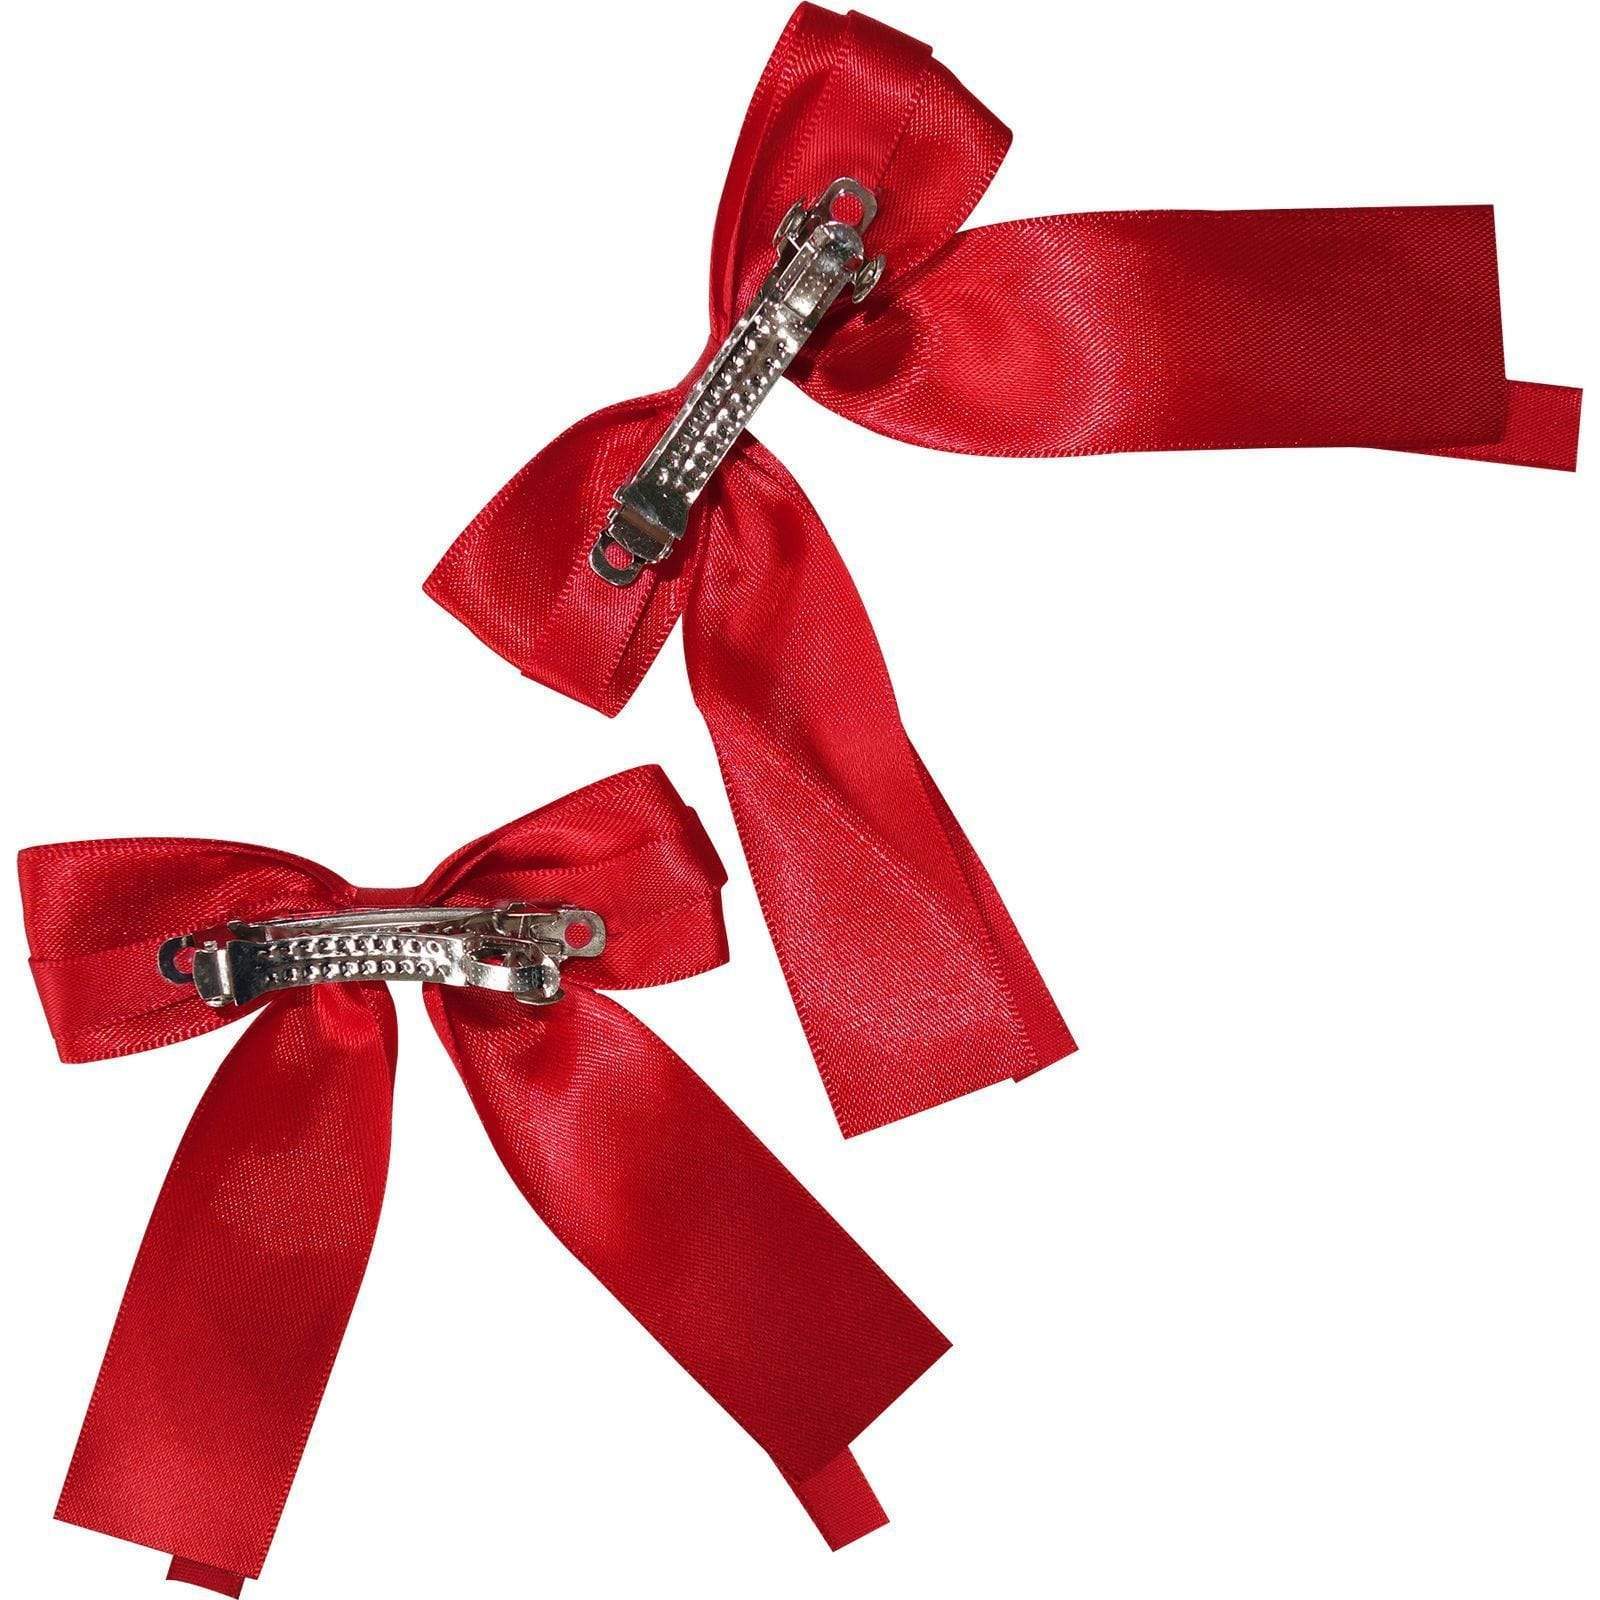 Pair of Red Hair Bow Ribbon Clips Grips Girls Toddler Childrens Kids Accessories